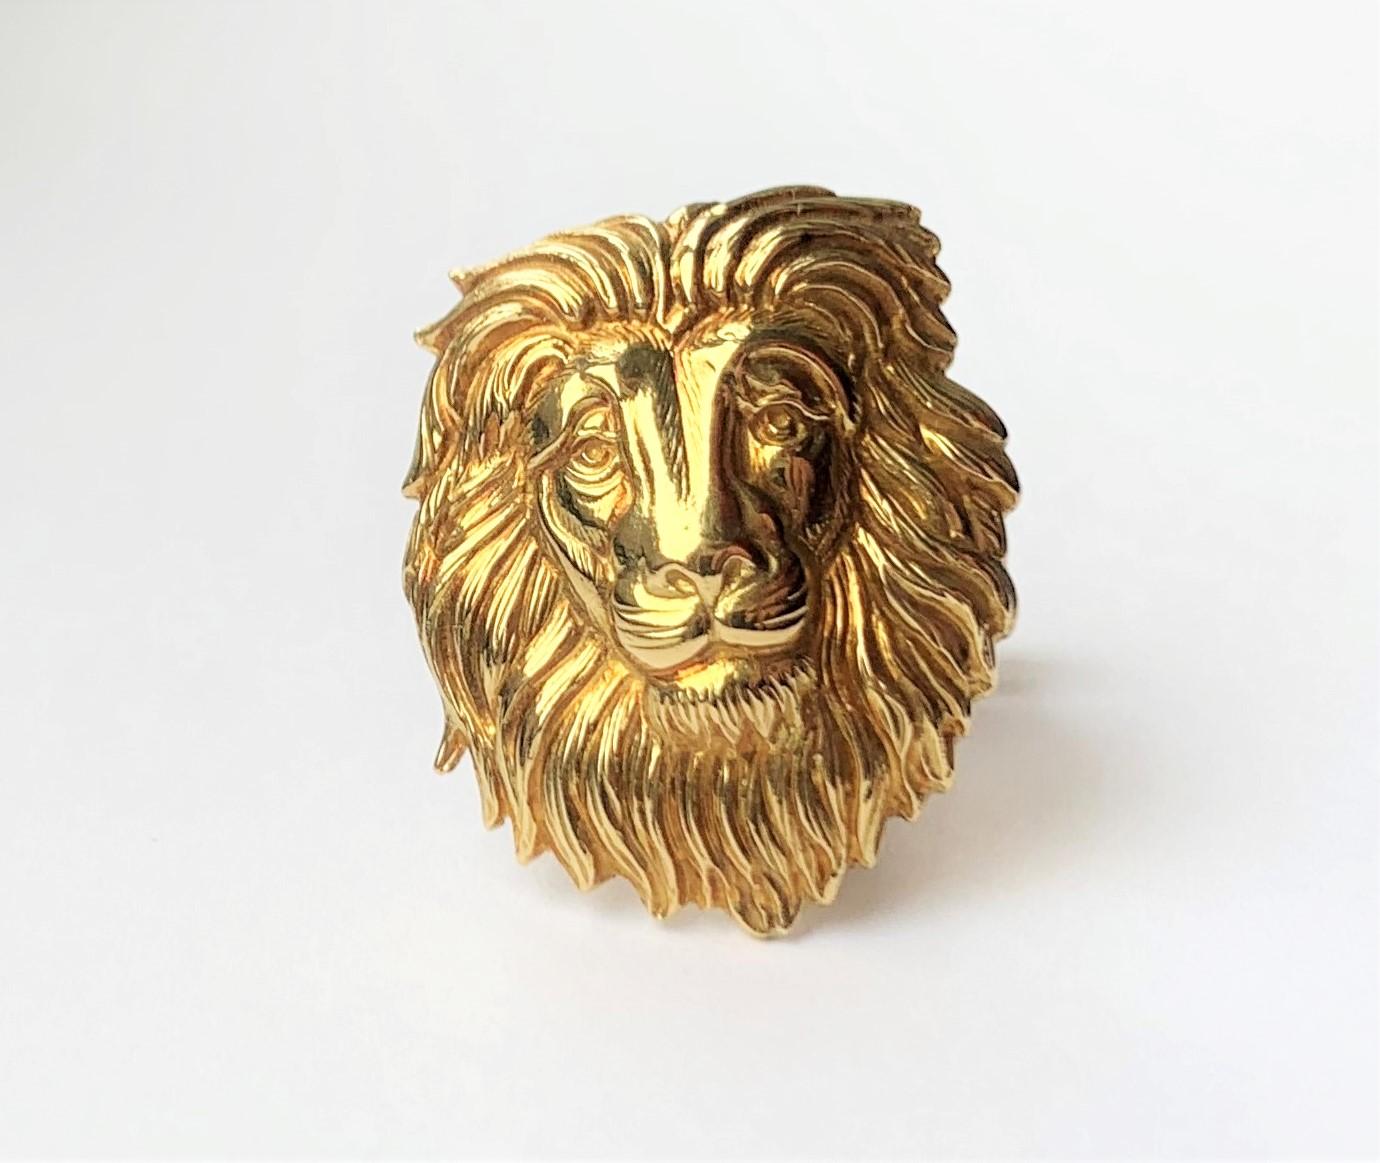 Cufflinks by Rosior Hand Chiseled in Yellow Gold featuring a Lion's head.
Weight in 19.2K Gold: 19.4 g.
Unique piece.
Stamped by the portuguese assay office as 19.2K gold.
Stamped with Rosior hallmark.
Loyal to artisanal techniques, Rosior master